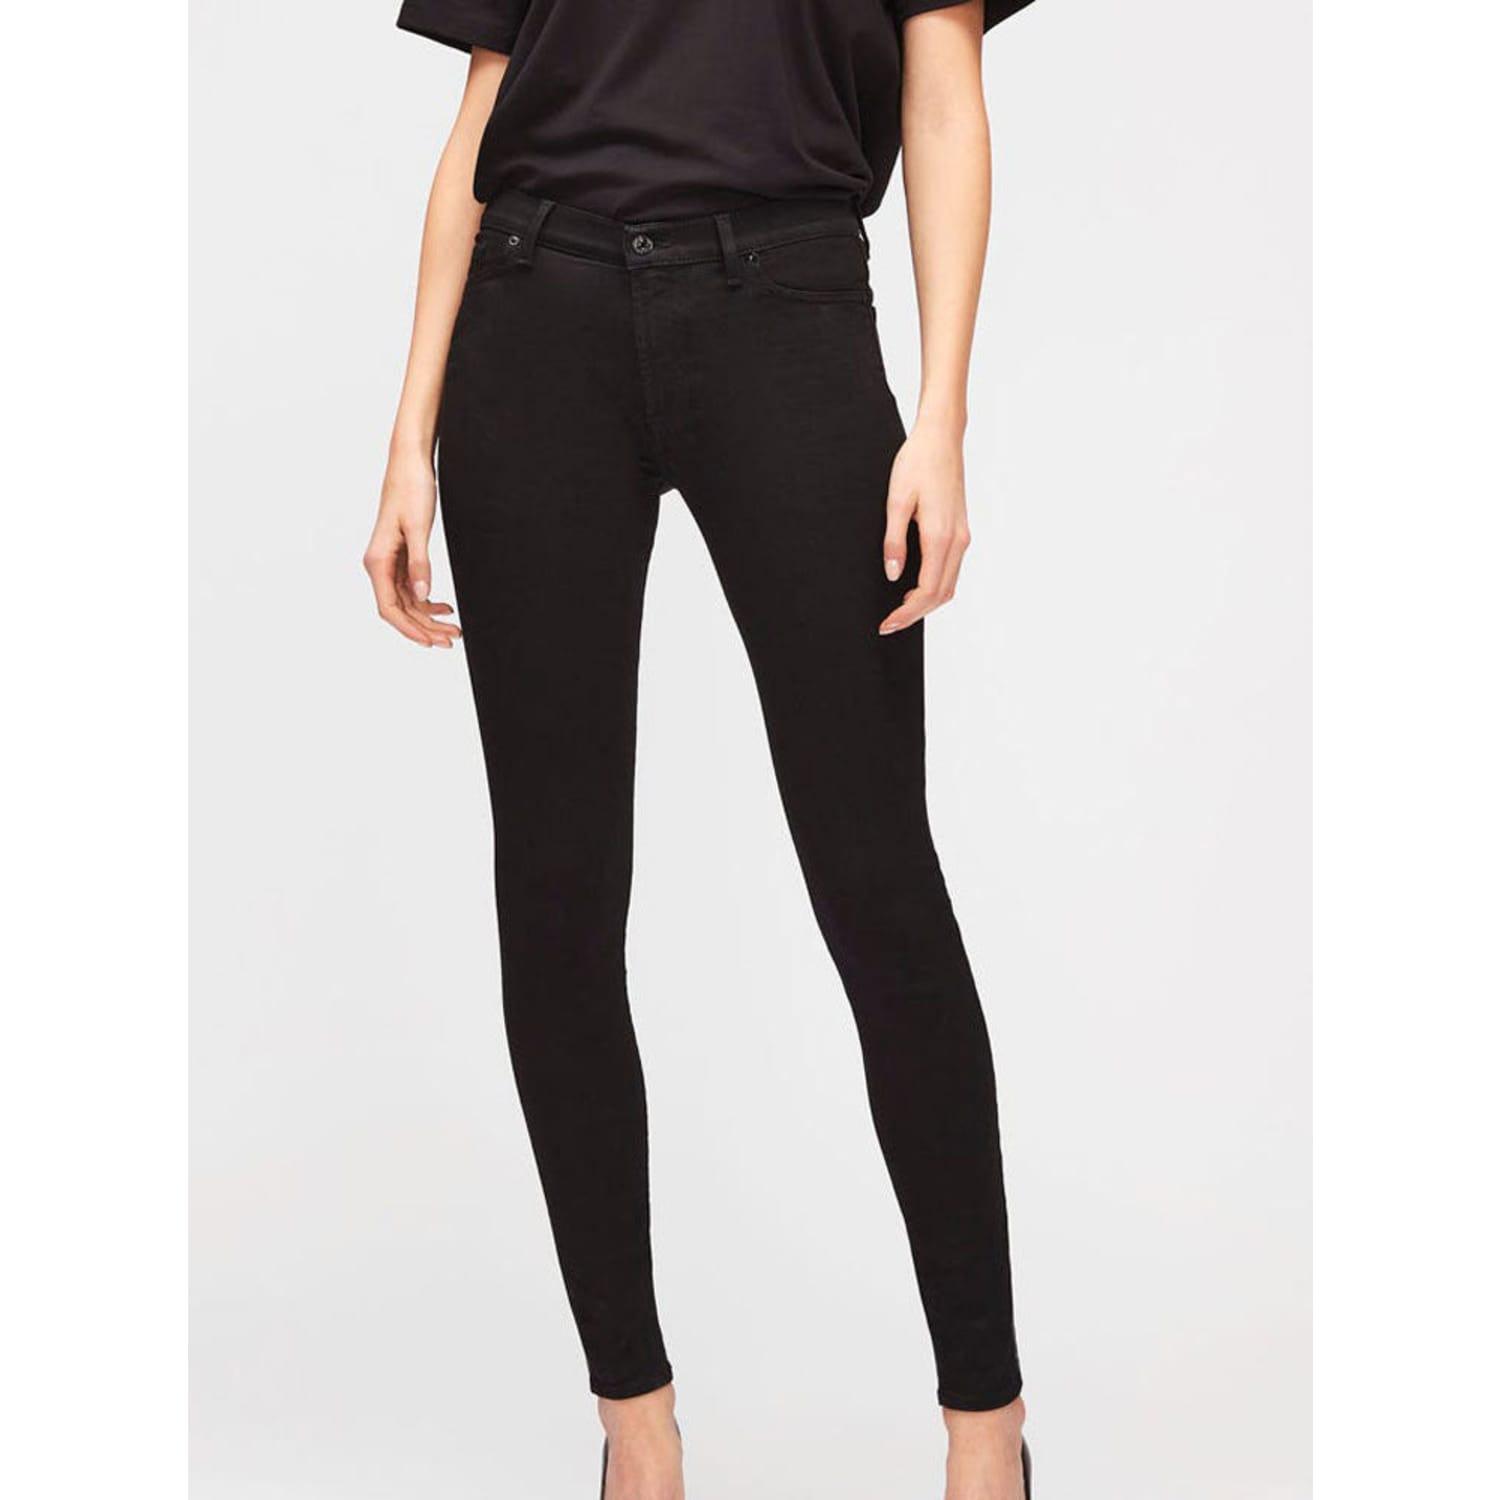 7 For All Mankind High Waist Illusion Luxe Black Slim Skinny Jeans | Lyst